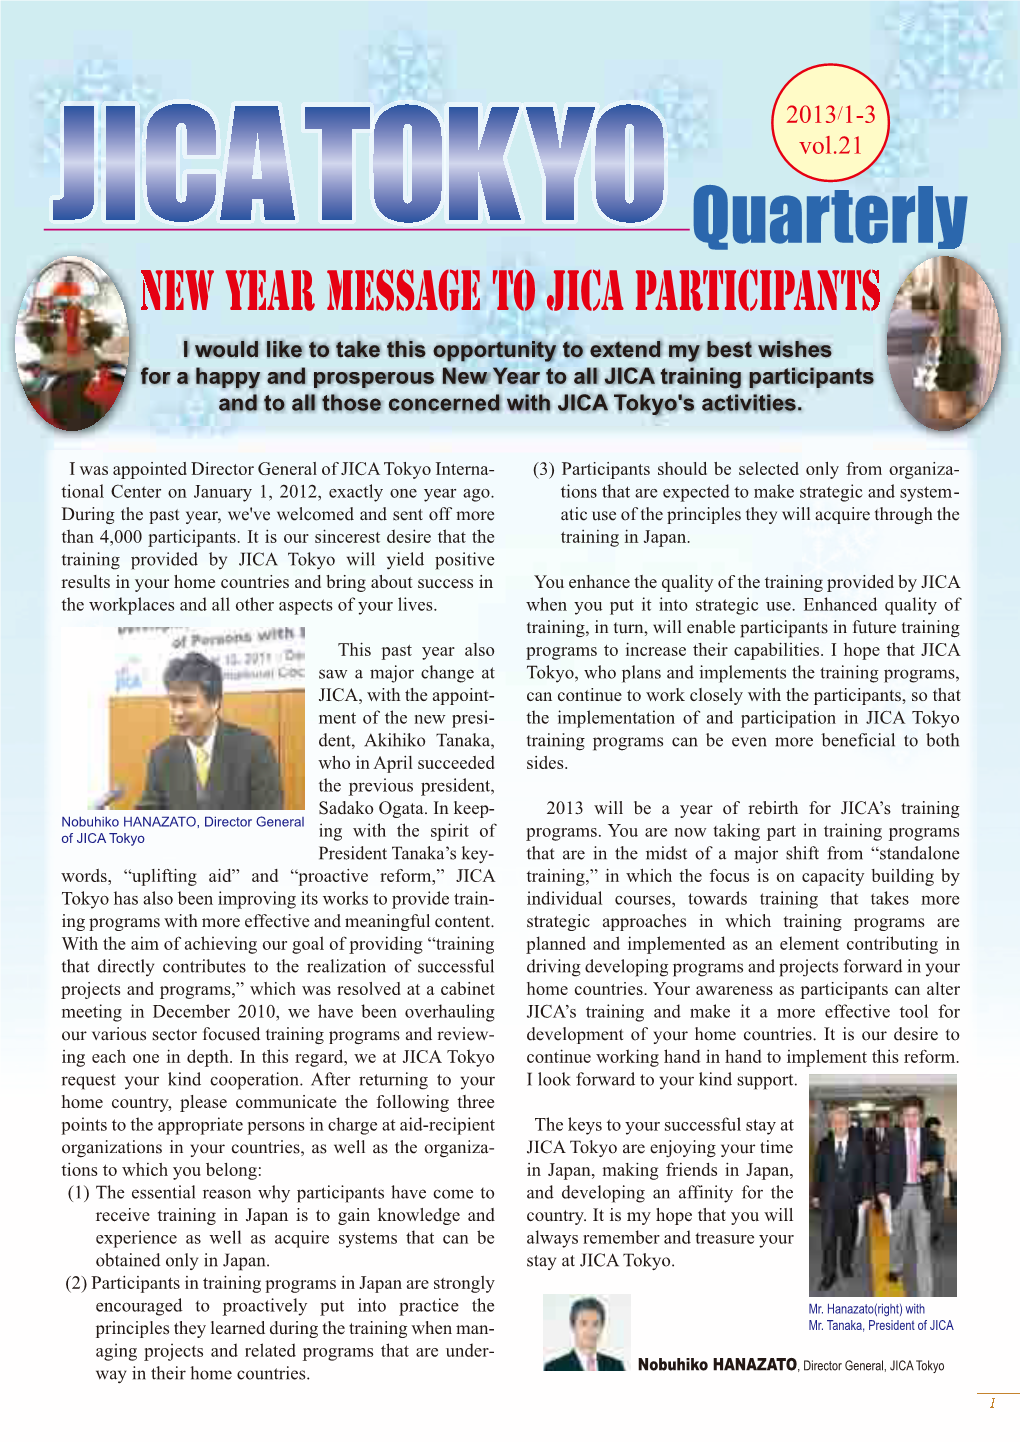 New Year Message to JICA Participants